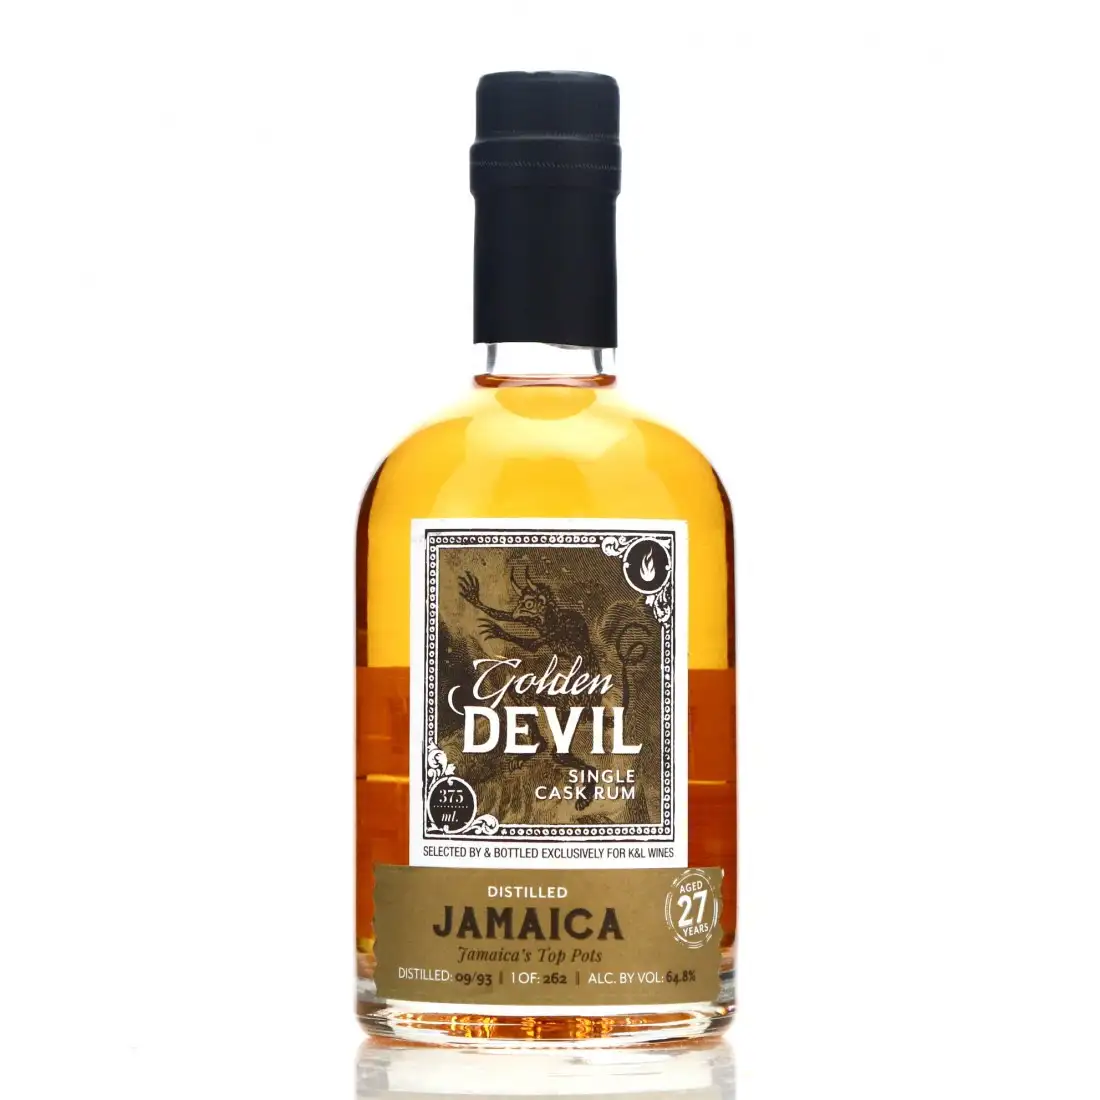 Image of the front of the bottle of the rum Golden Devil (K&L Wines)